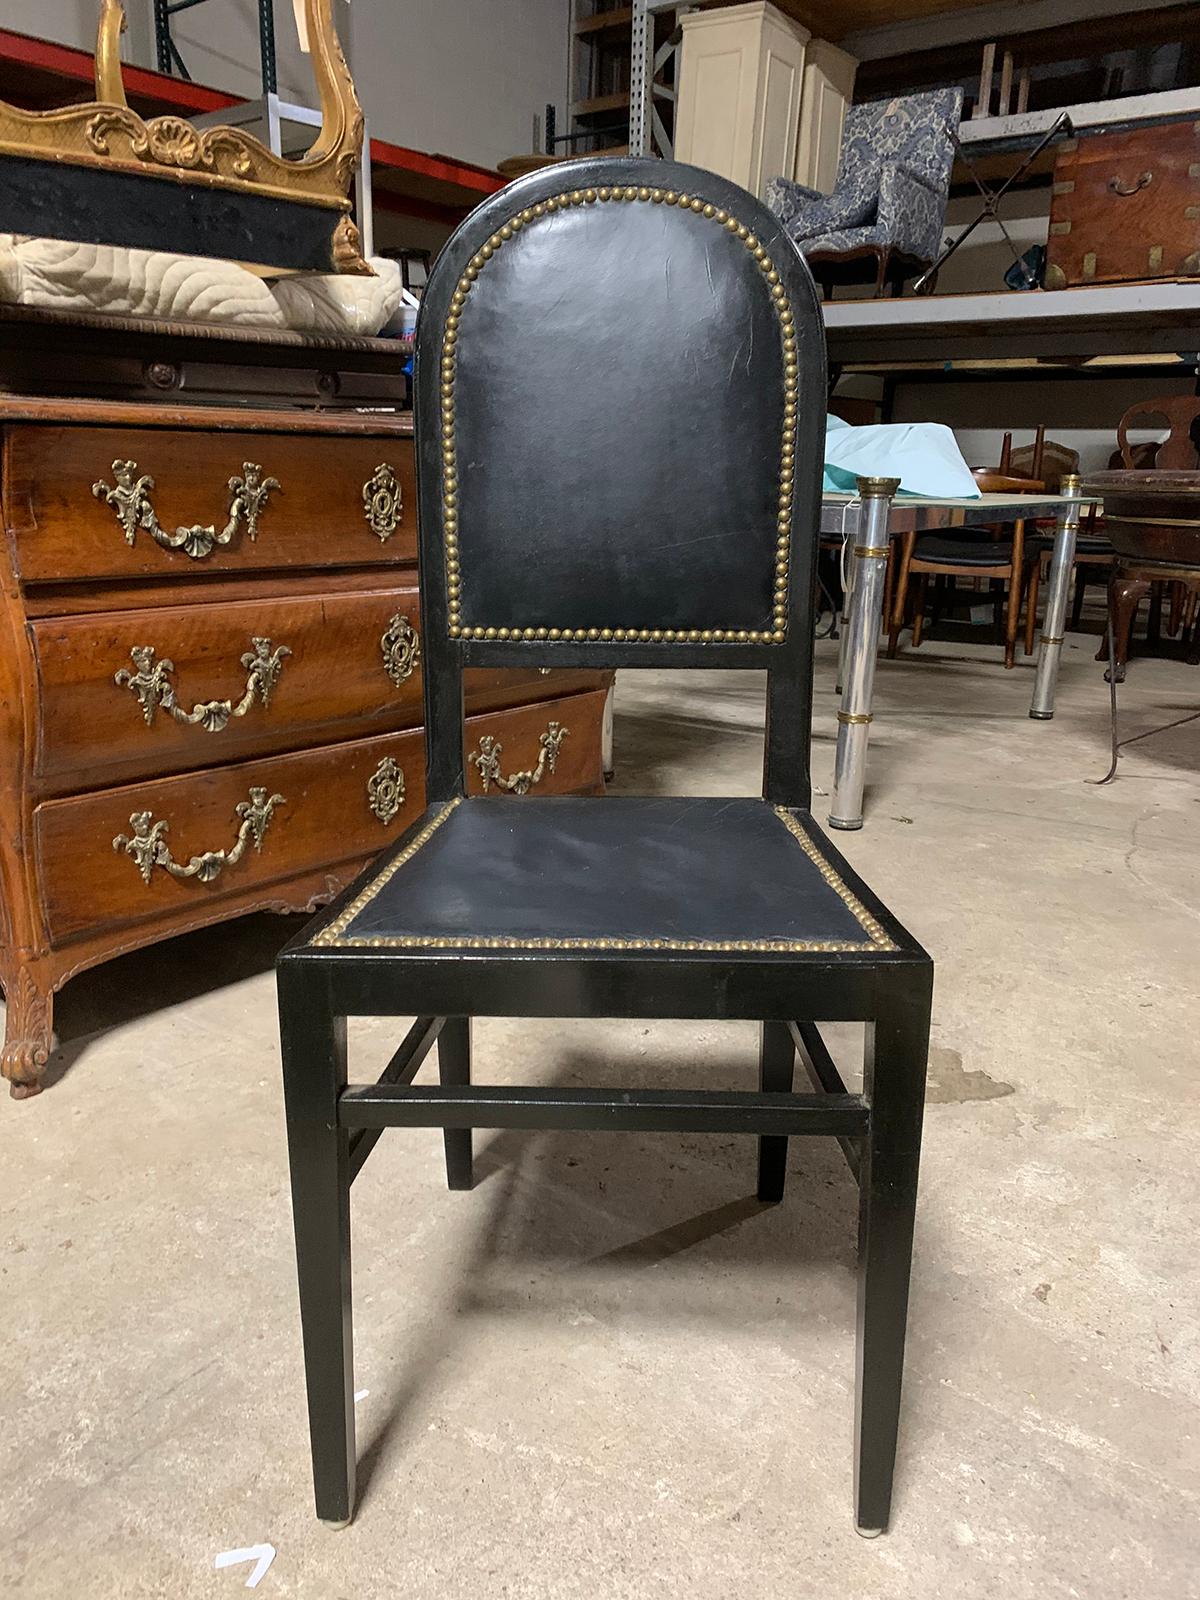 19th-20th century black leather desk / side chair with nailheads. Aesthetic movement.